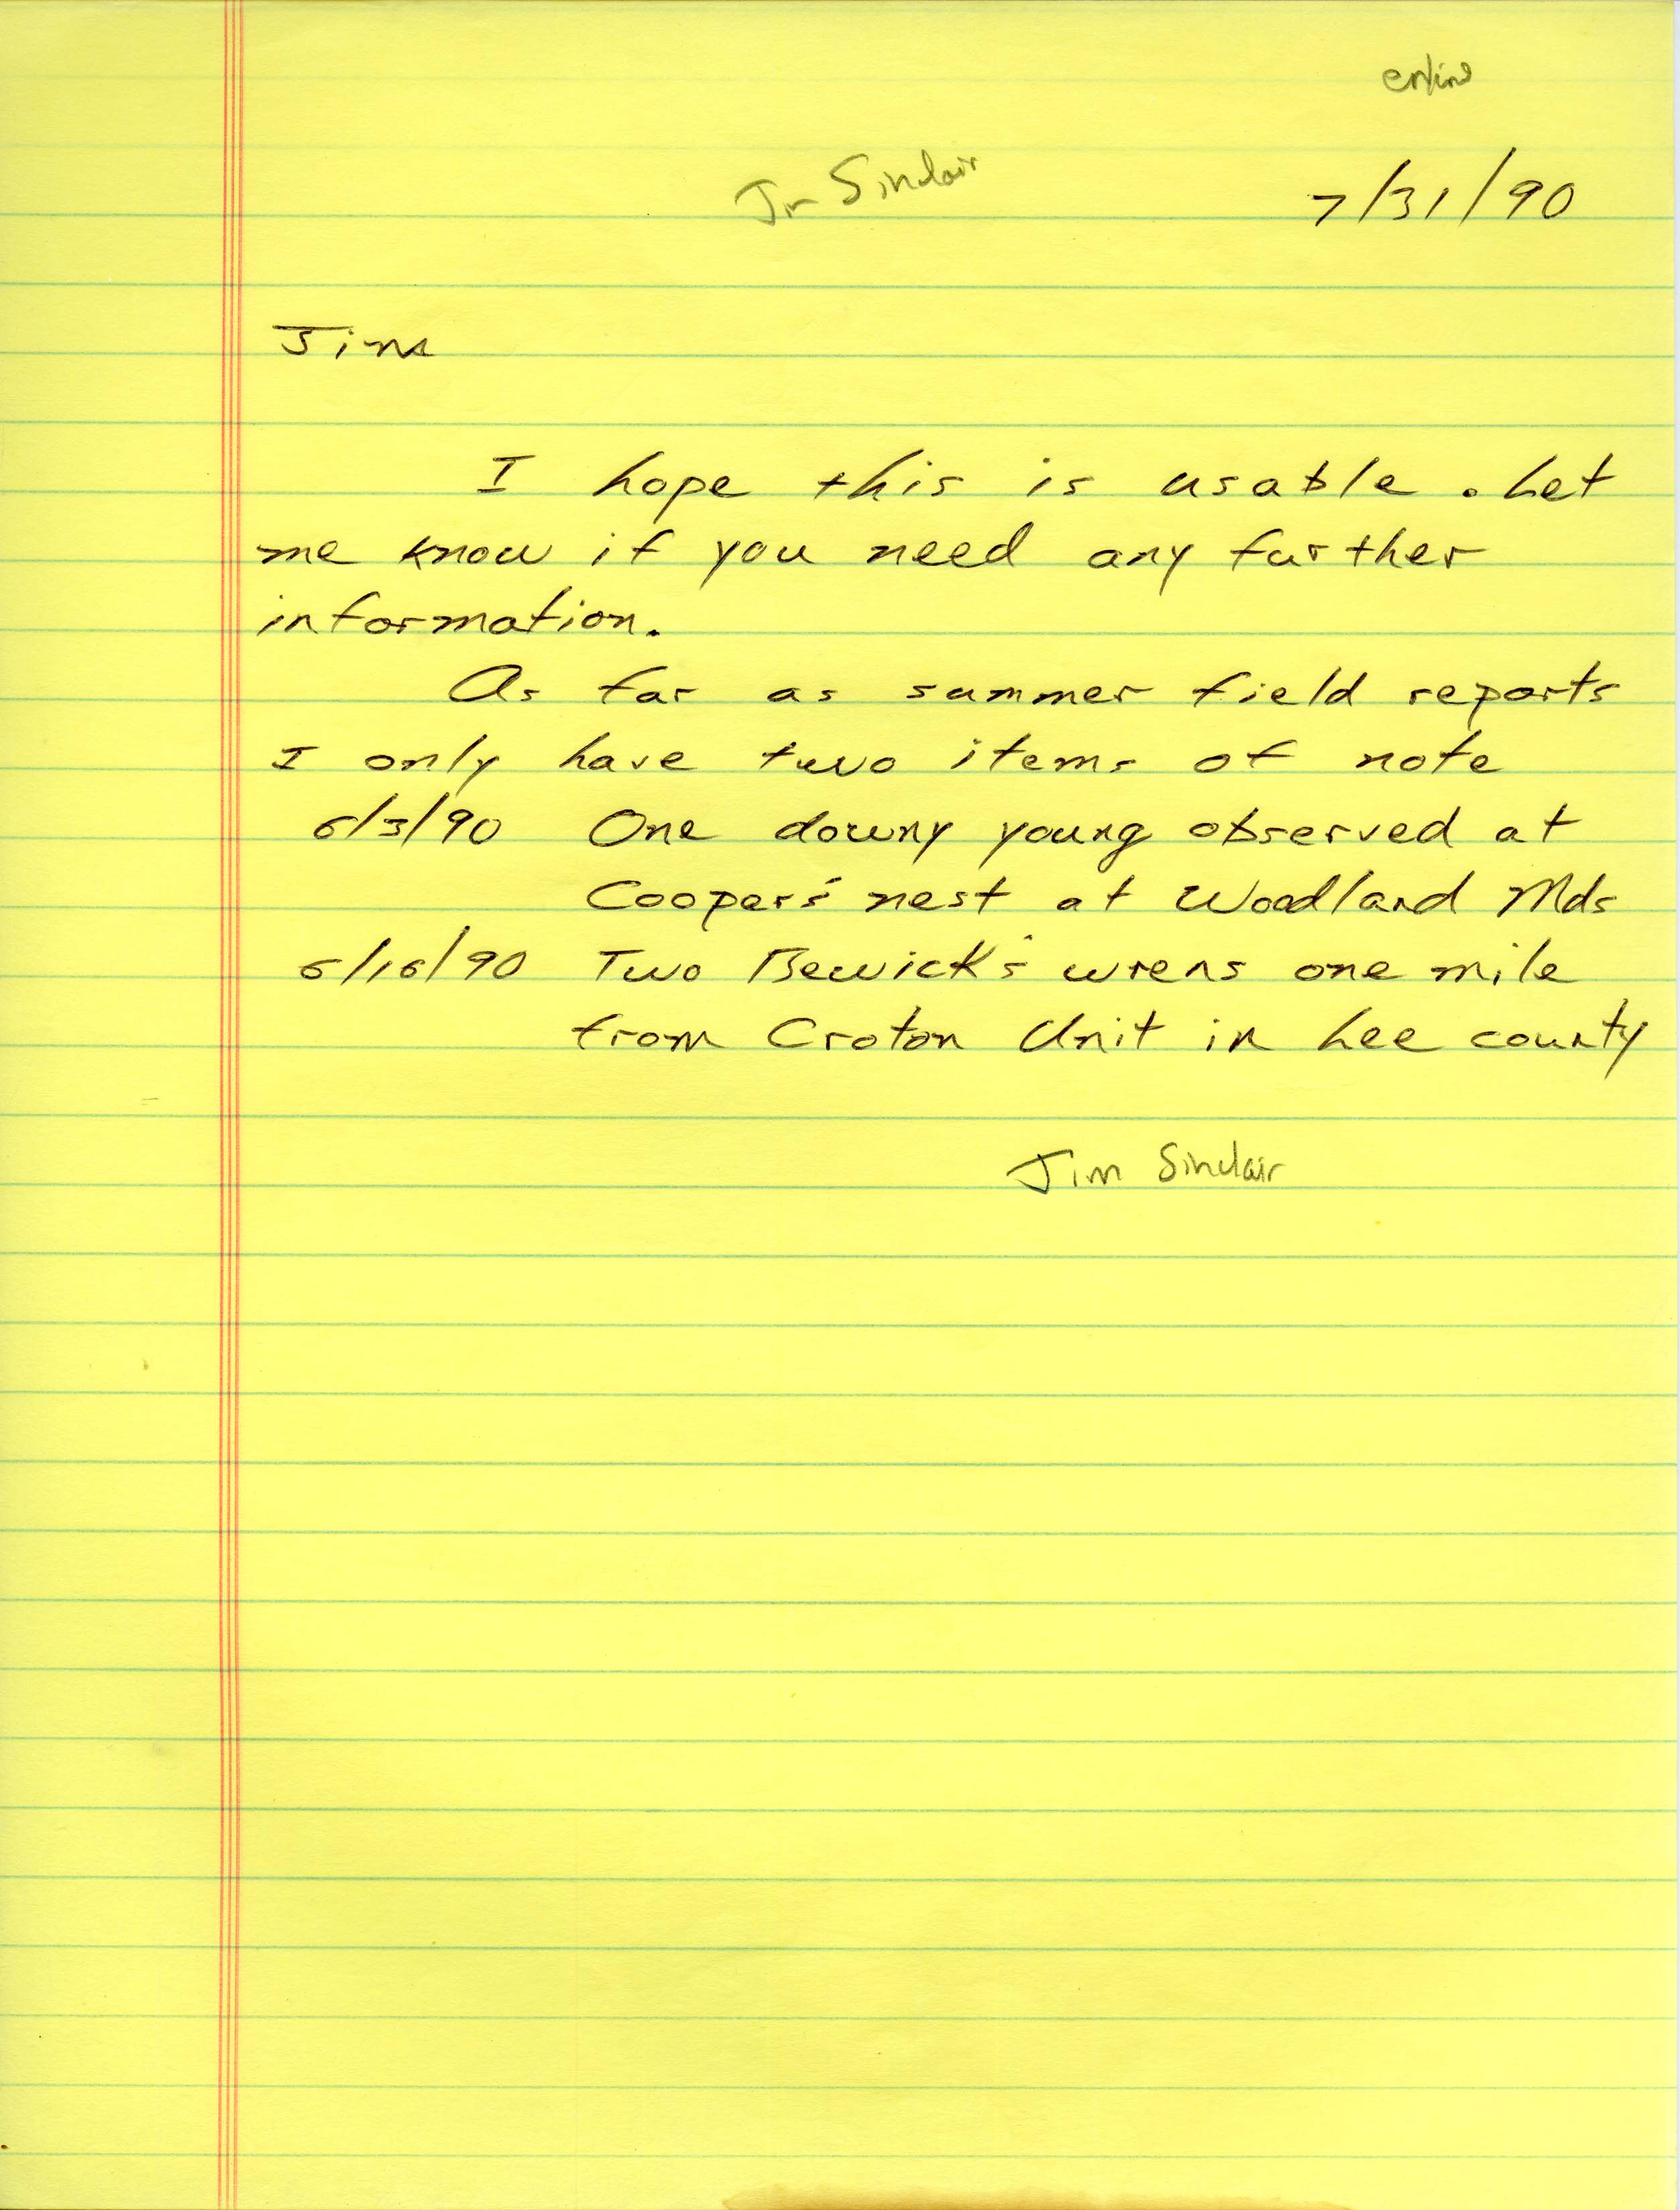 Jim Sinclair letter to Jim Dinsmore regarding summer field reports for IOU quarterly field reports for summer 1990, July 31, 1990